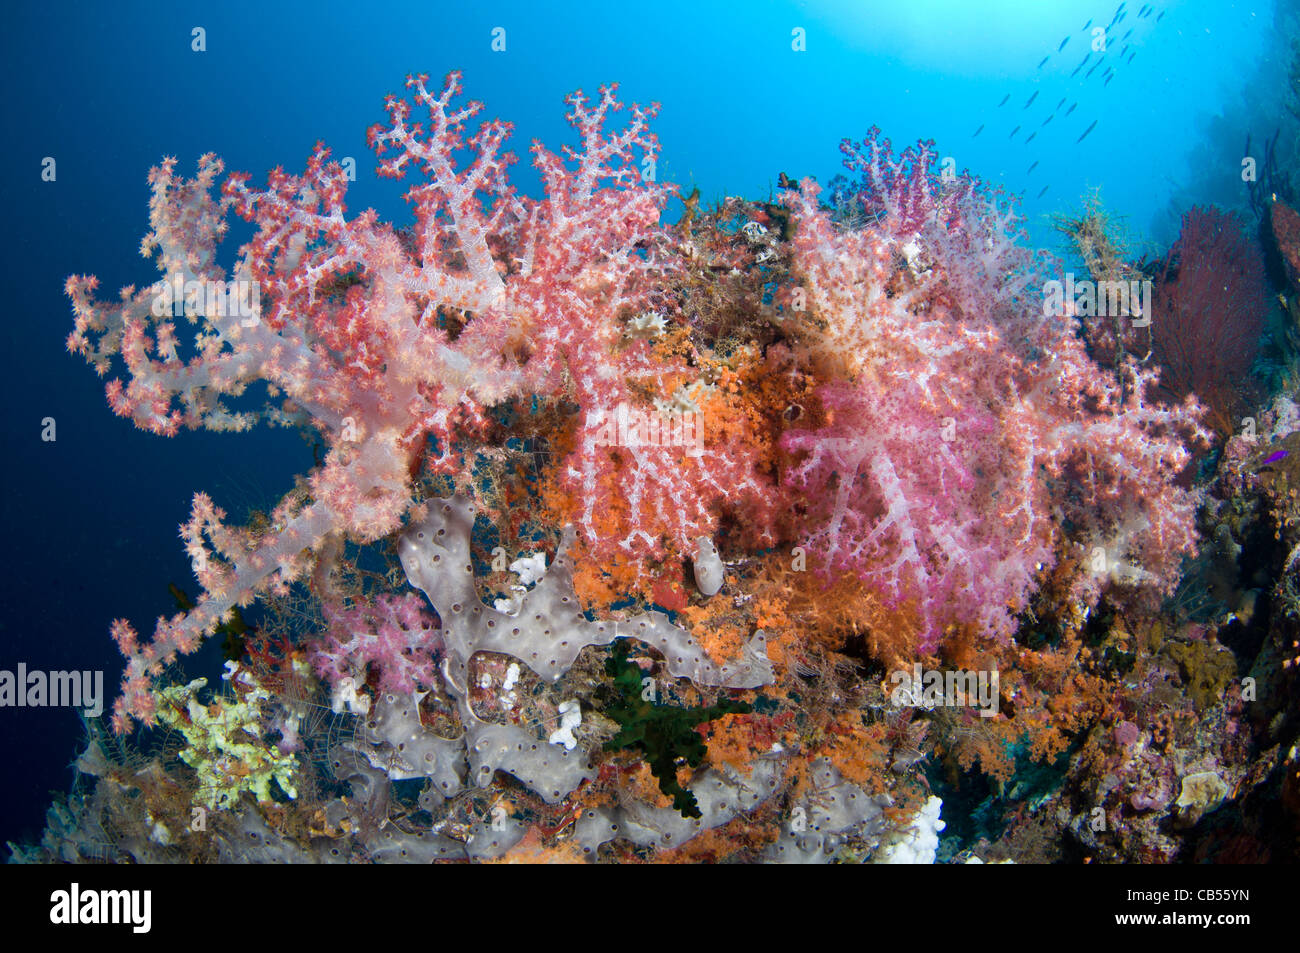 Soft coral and tropical fish, Dendronephthya sp., Misool, Raja Ampat, West Papua, Indonesia, Pacific Ocean Stock Photo